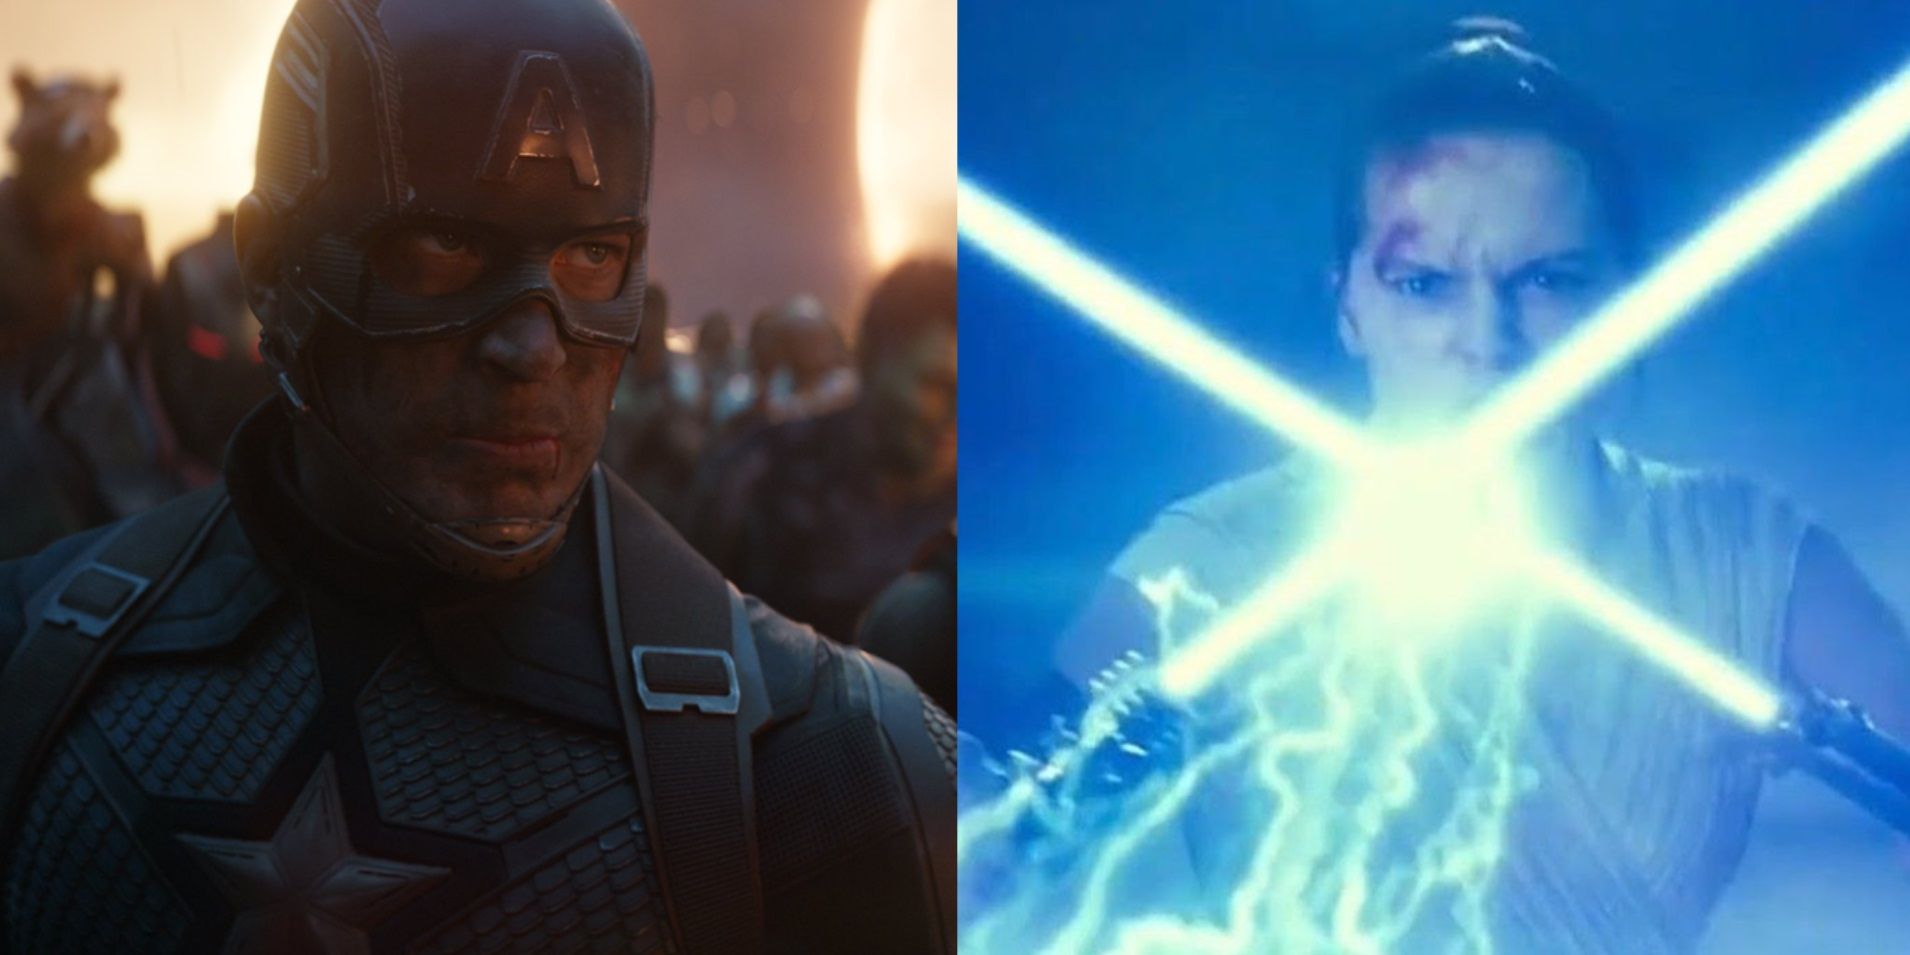 Split image of Captain America assembling the Avengers in Endgame and Rey with two lightsabers in The Rise of Skywalker